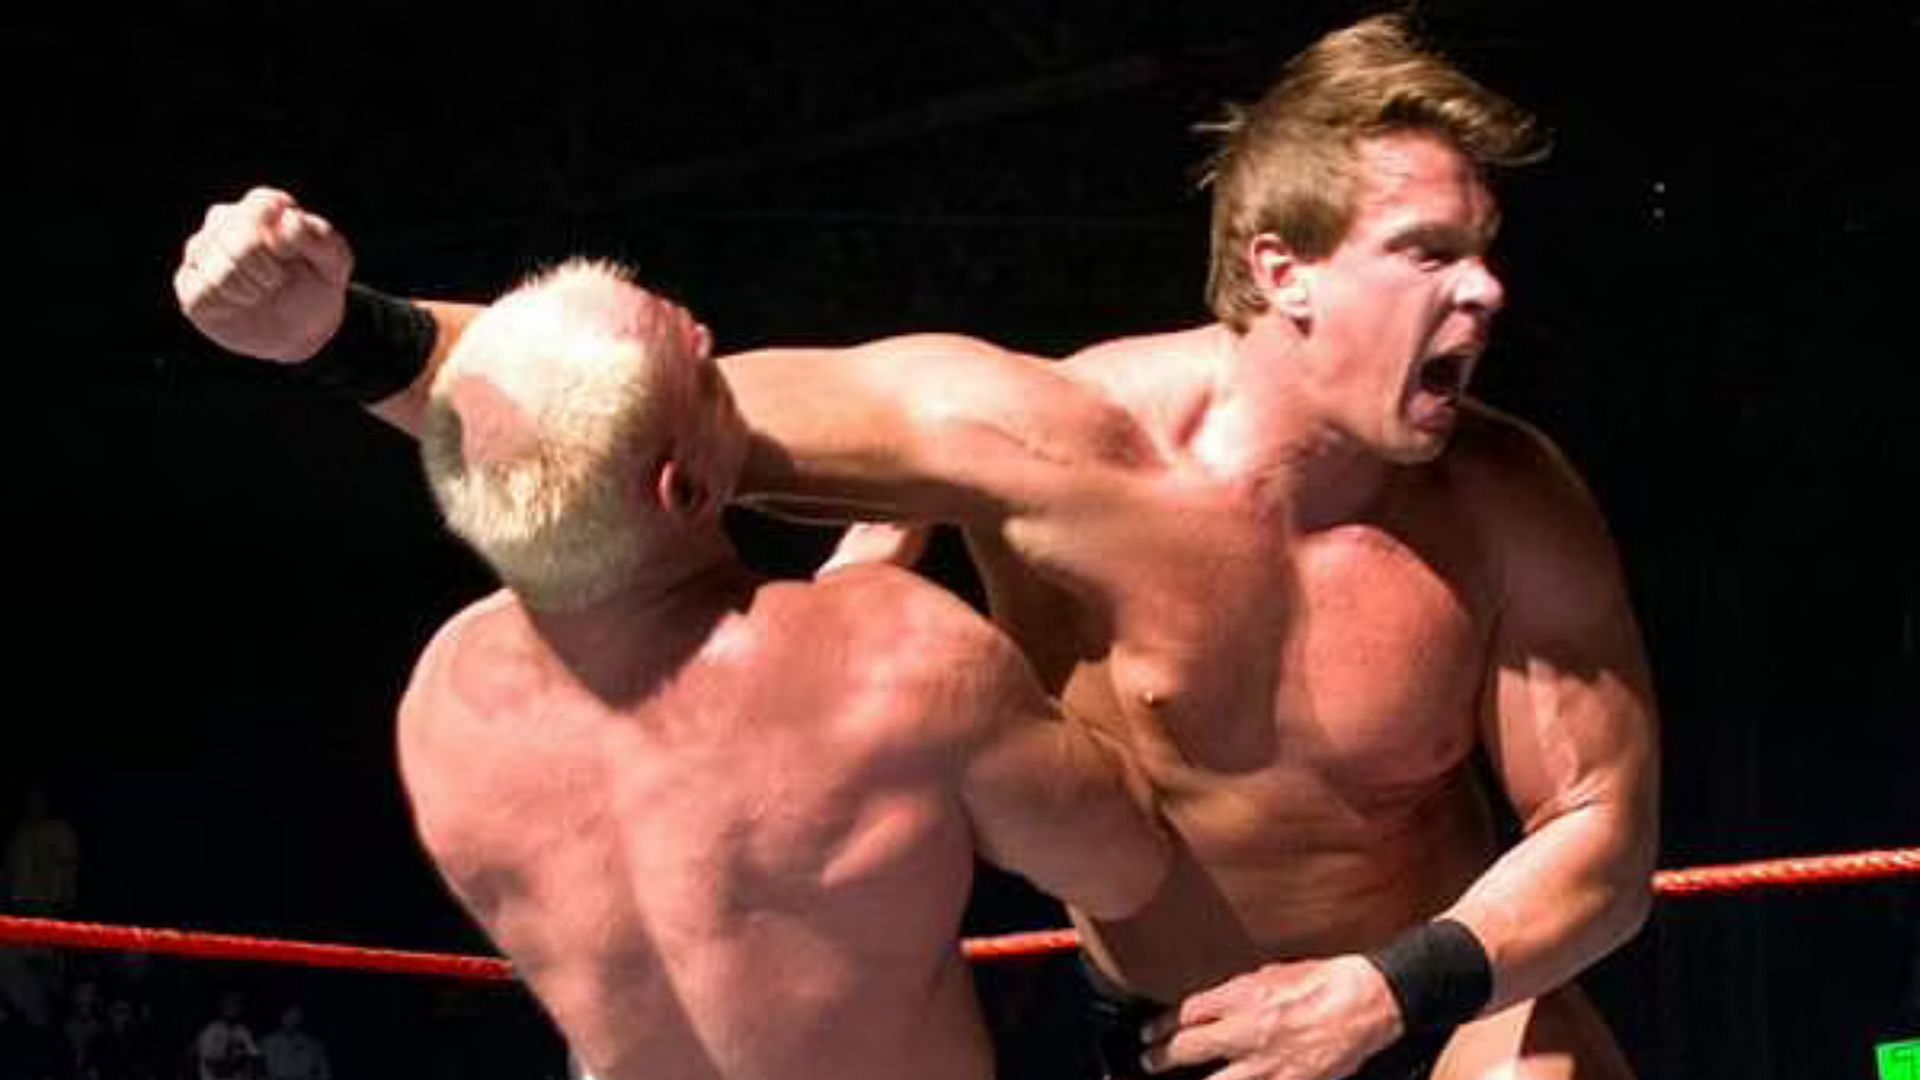 JBL was very physical in the ring